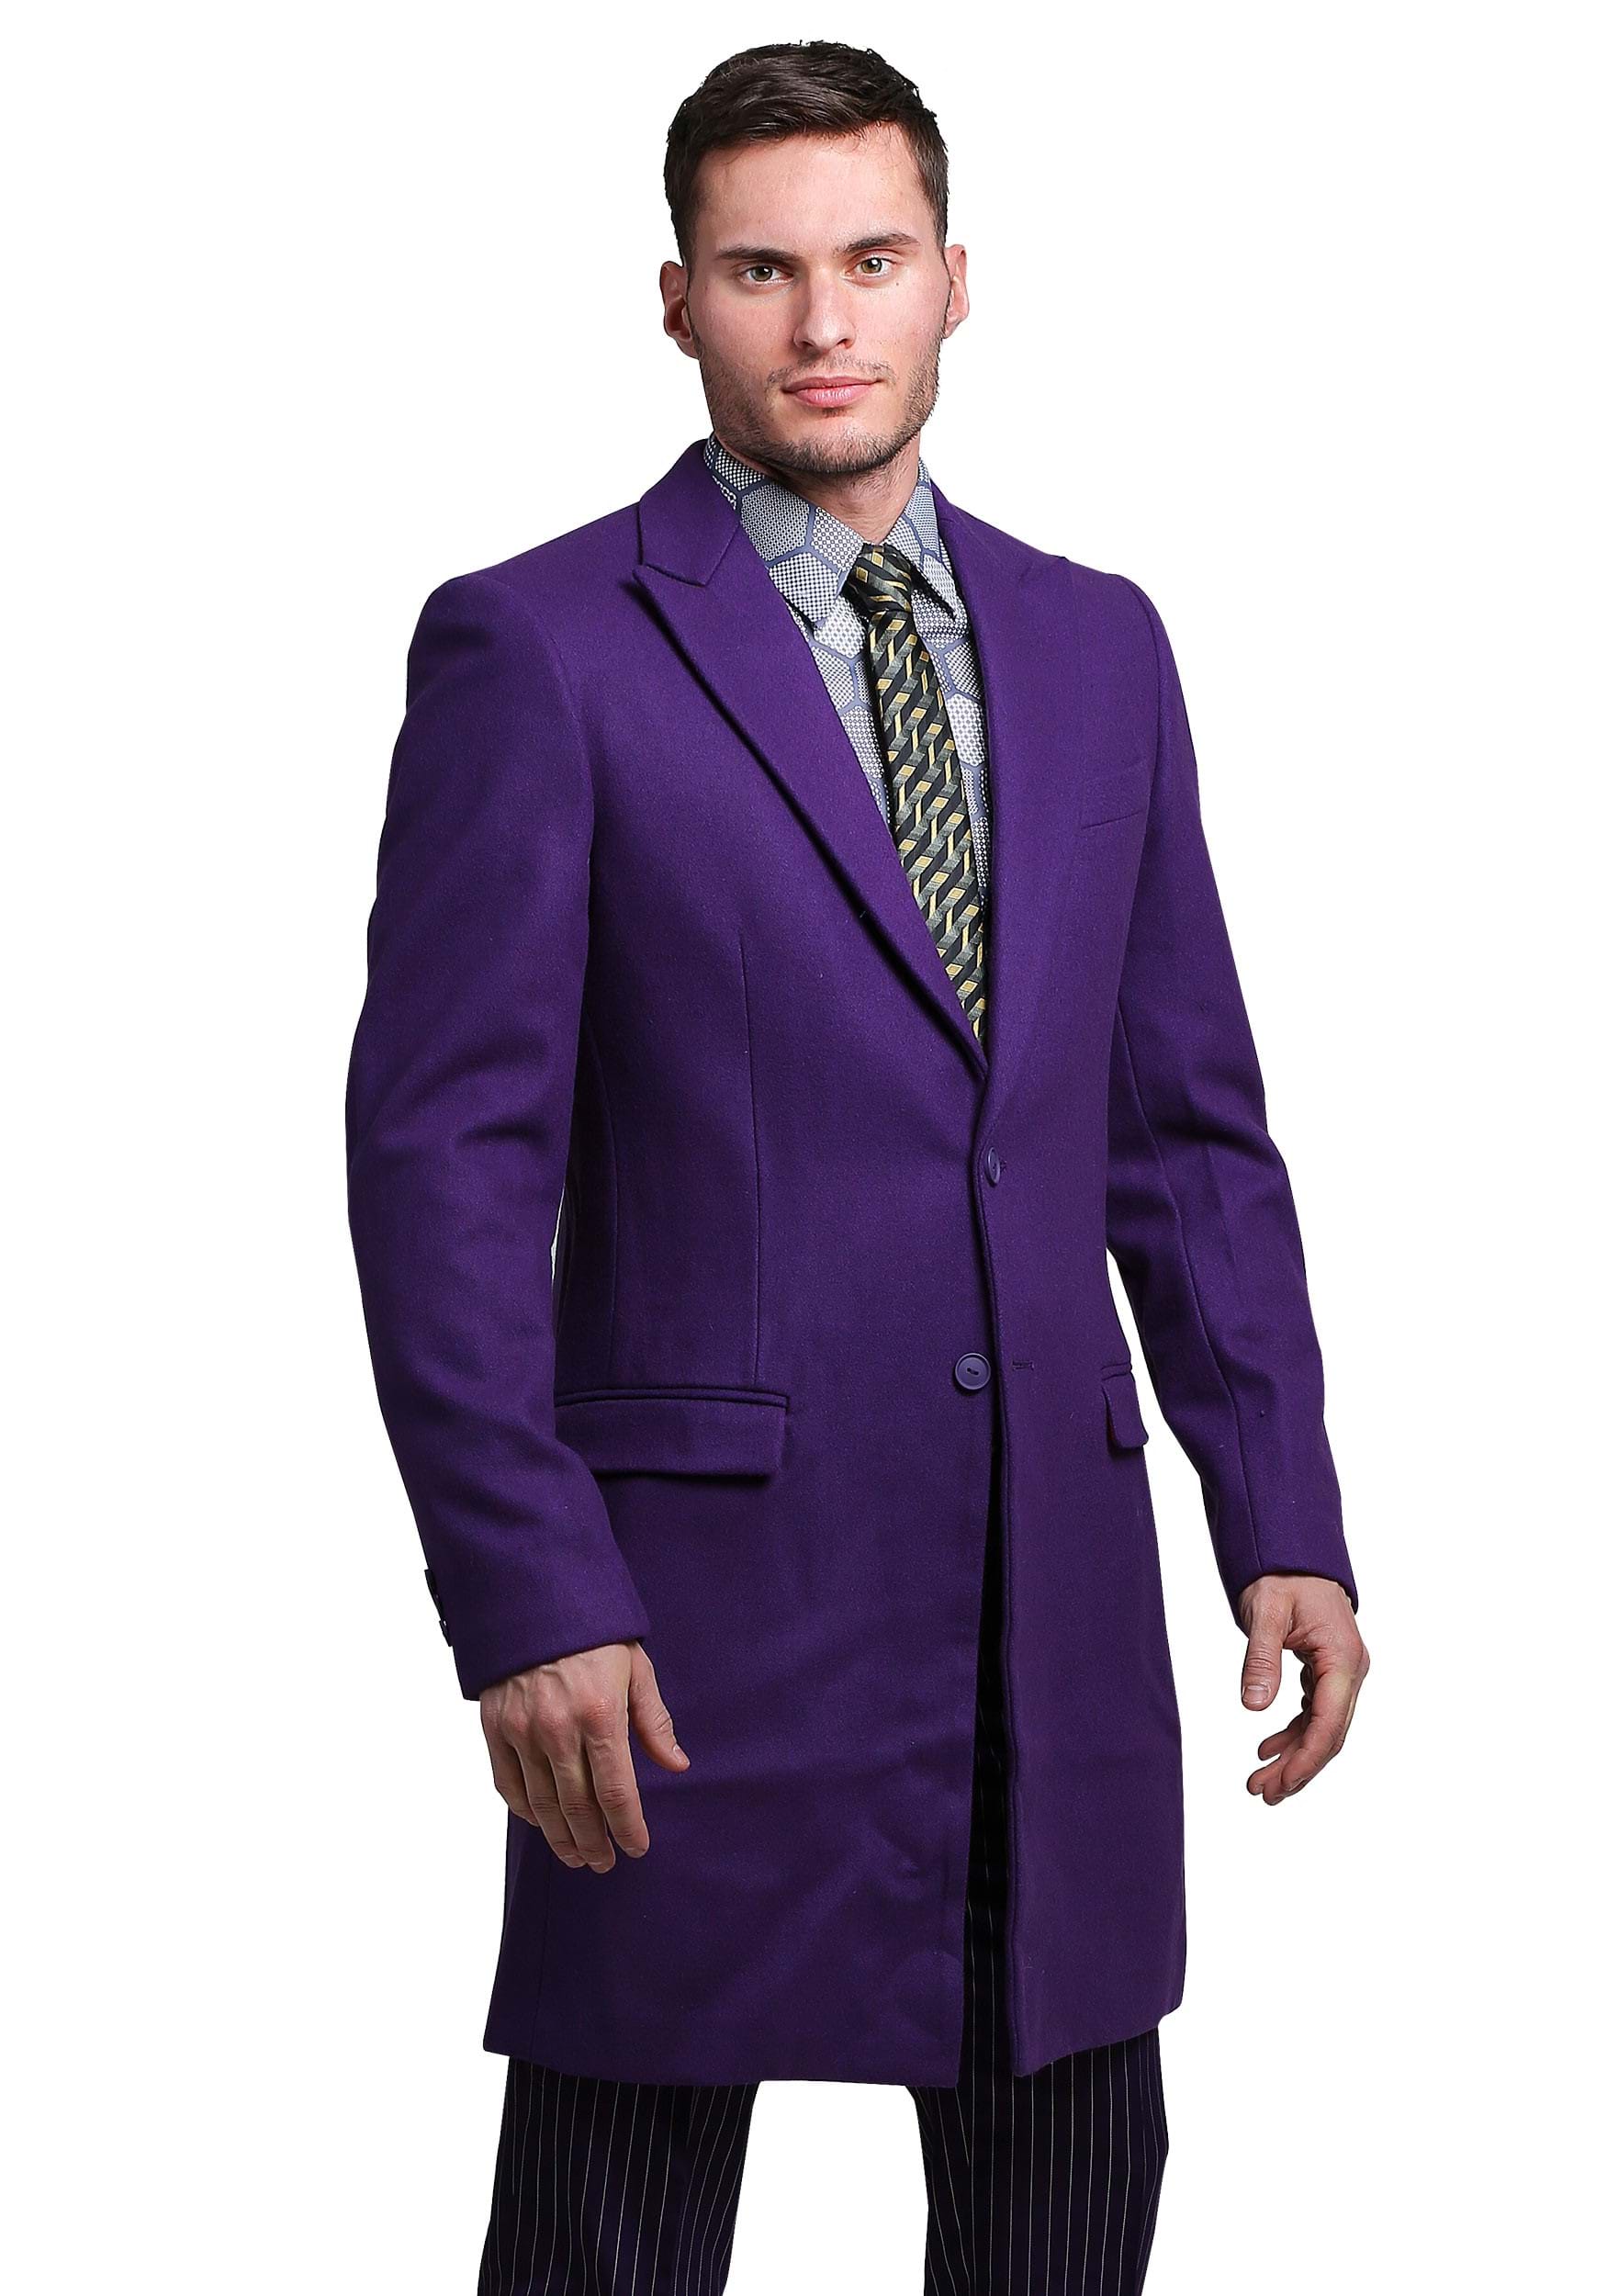 Image of THE JOKER Slim Fit Suit Overcoat (Authentic) ID FUN9011O-46